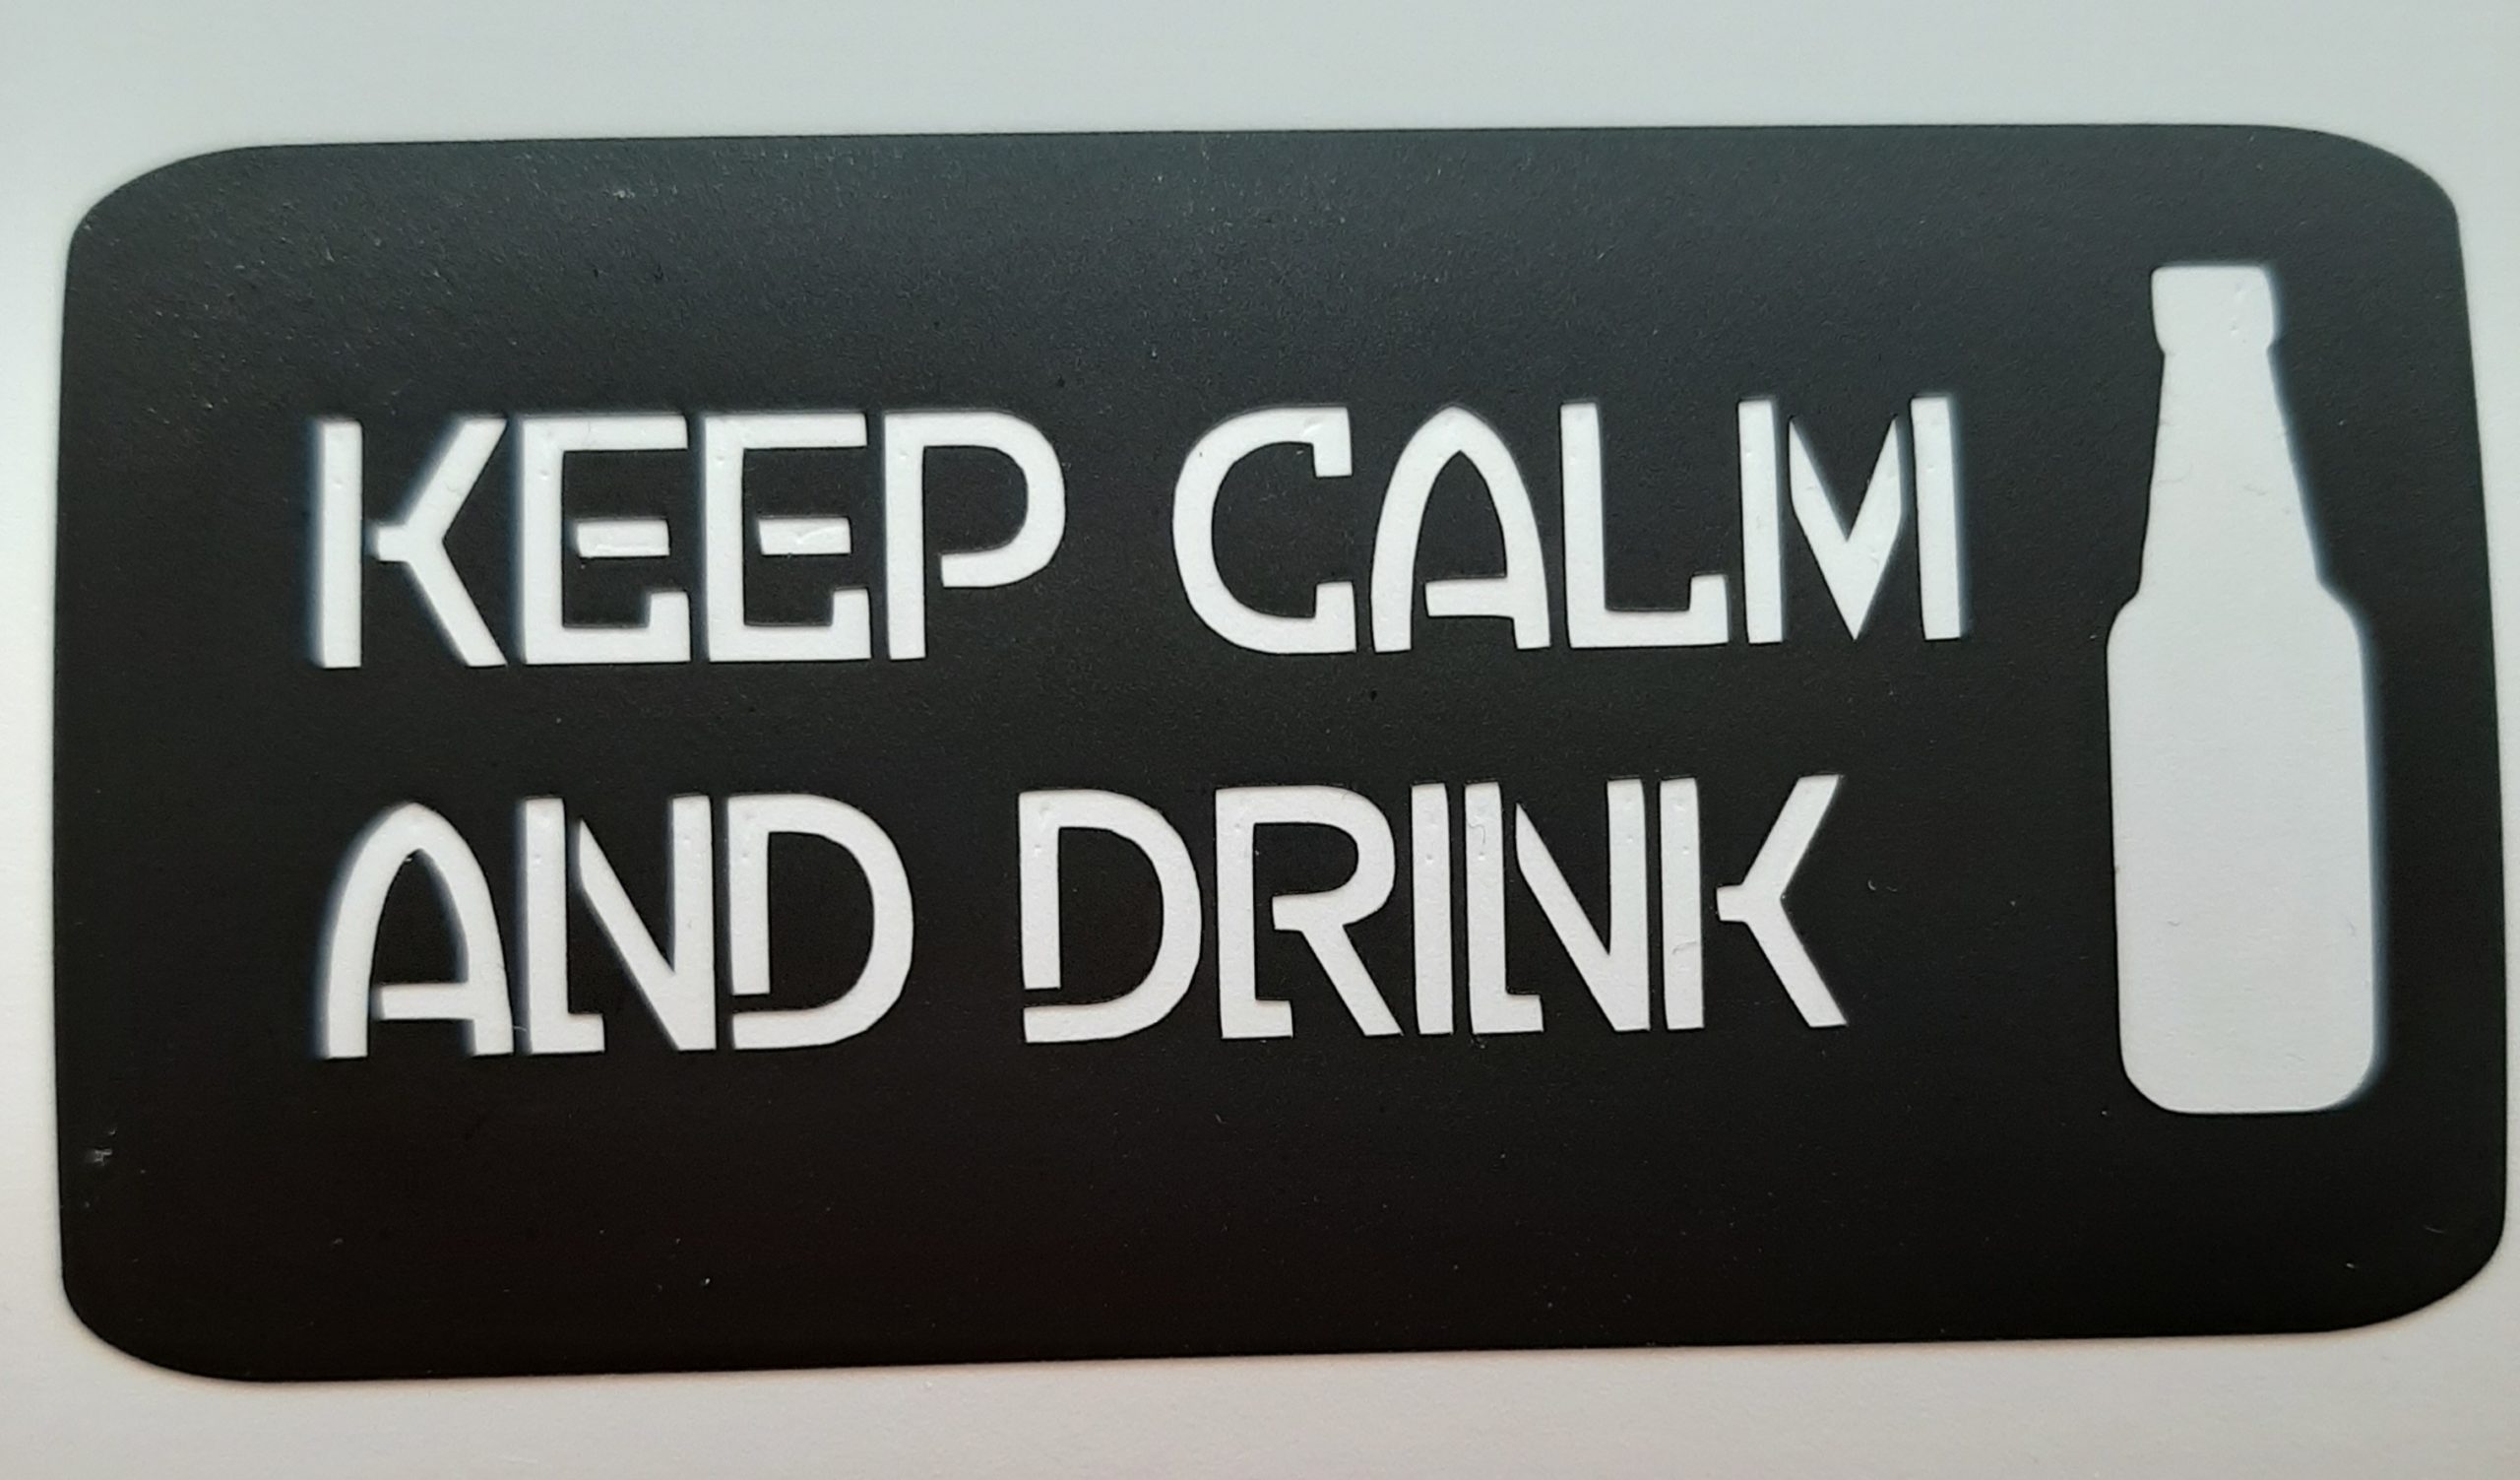 keep calm and drink beer